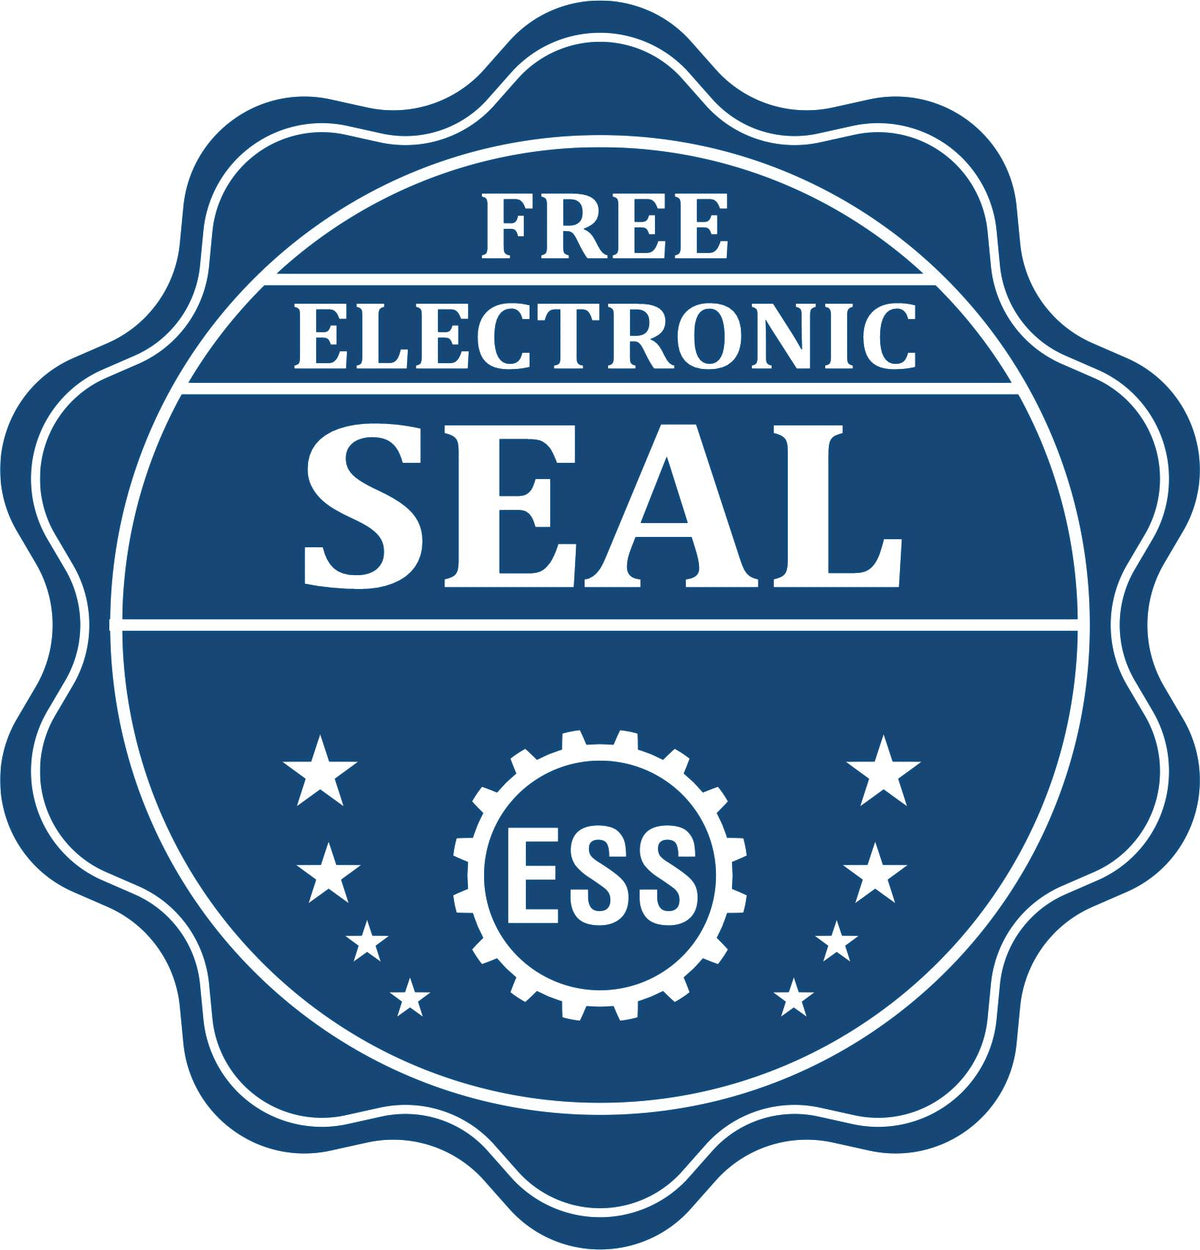 A badge showing a free electronic seal for the Premium MaxLight Pre-Inked Washington Geology Stamp with stars and the ESS gear on the emblem.